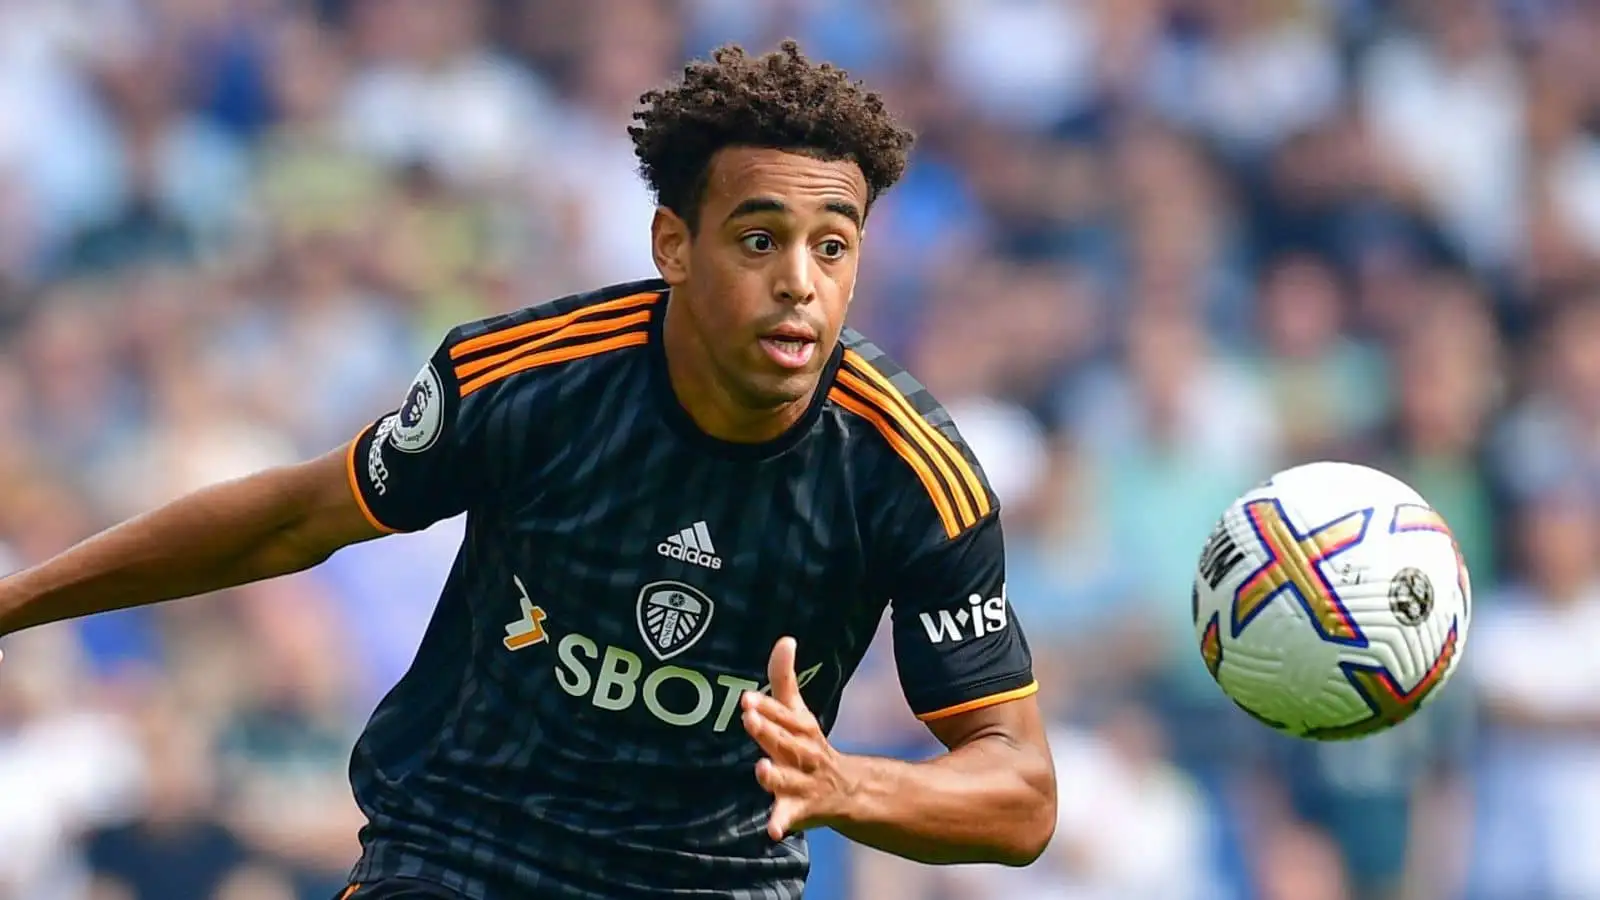 Tyler Adams tipped to stay at Leeds as Aston Villa concerns arise; Chelsea, Nottingham Forest focus on other deals